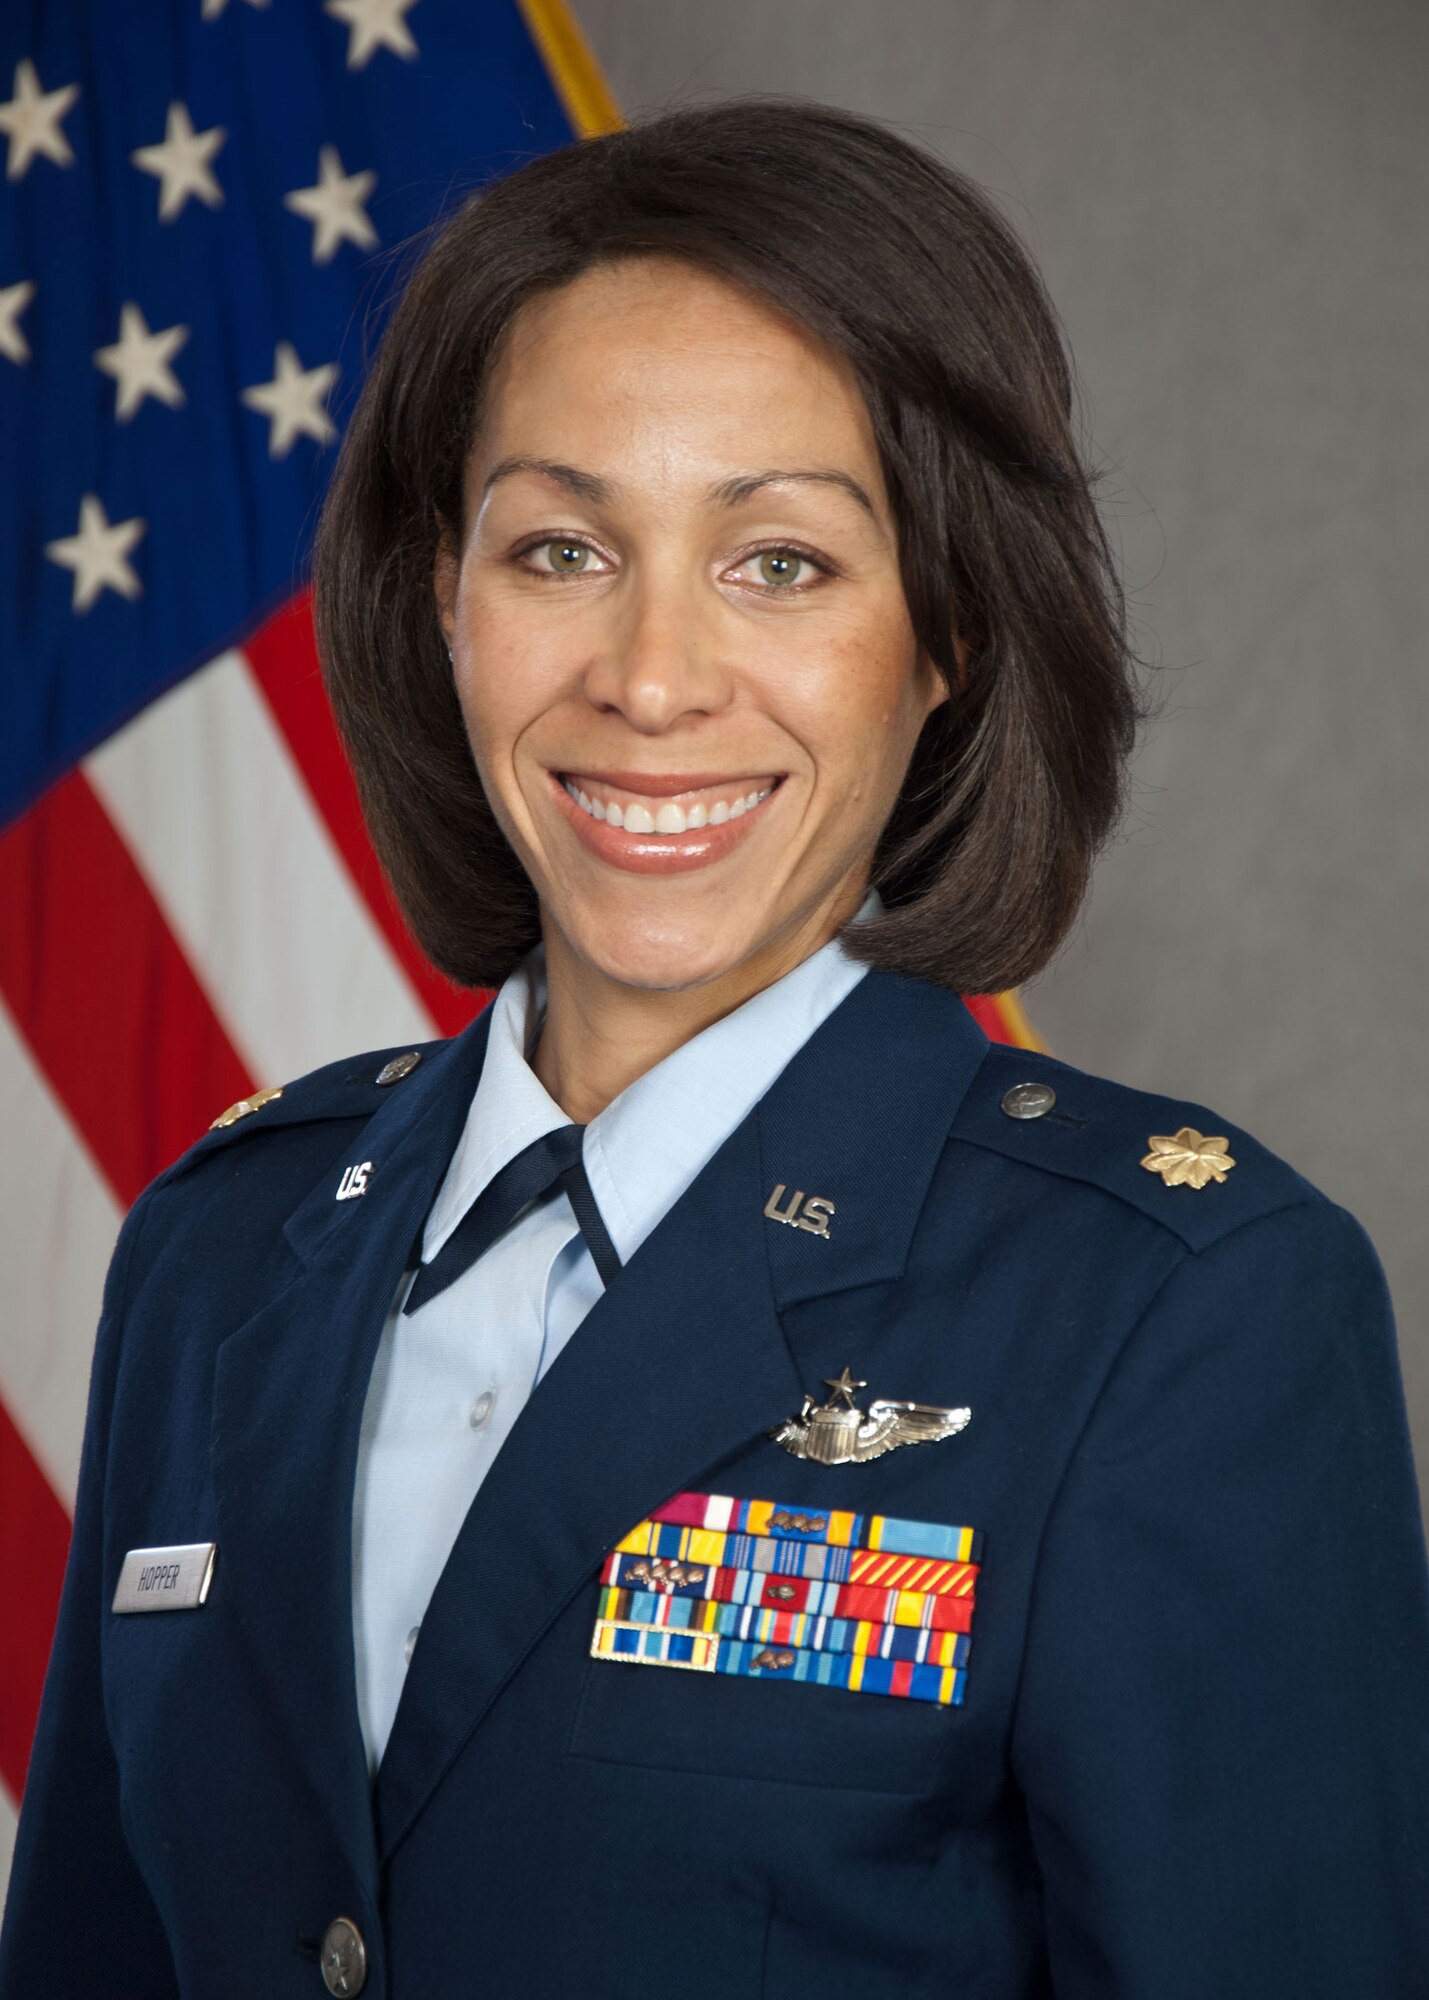 Maj. Christina "Thumper" Hopper is a T-38 instructor pilot with the 5th Flying Training Squadron, Vance Air Force Base, Oklahoma.  Following the tragic events of Sept. 11, 2001, Hopper flew numerous combat air patrol missions in support of Operation Noble Eagle protecting the President of the United States and critical US infrastructure. In 2002-2003, she deployed to Kuwait supporting Operations Southern Watch and Iraqi Freedom.  During those operations, Hopper flew more than 50 combat missions and became the first African-American female fighter pilot to fight in a major war.